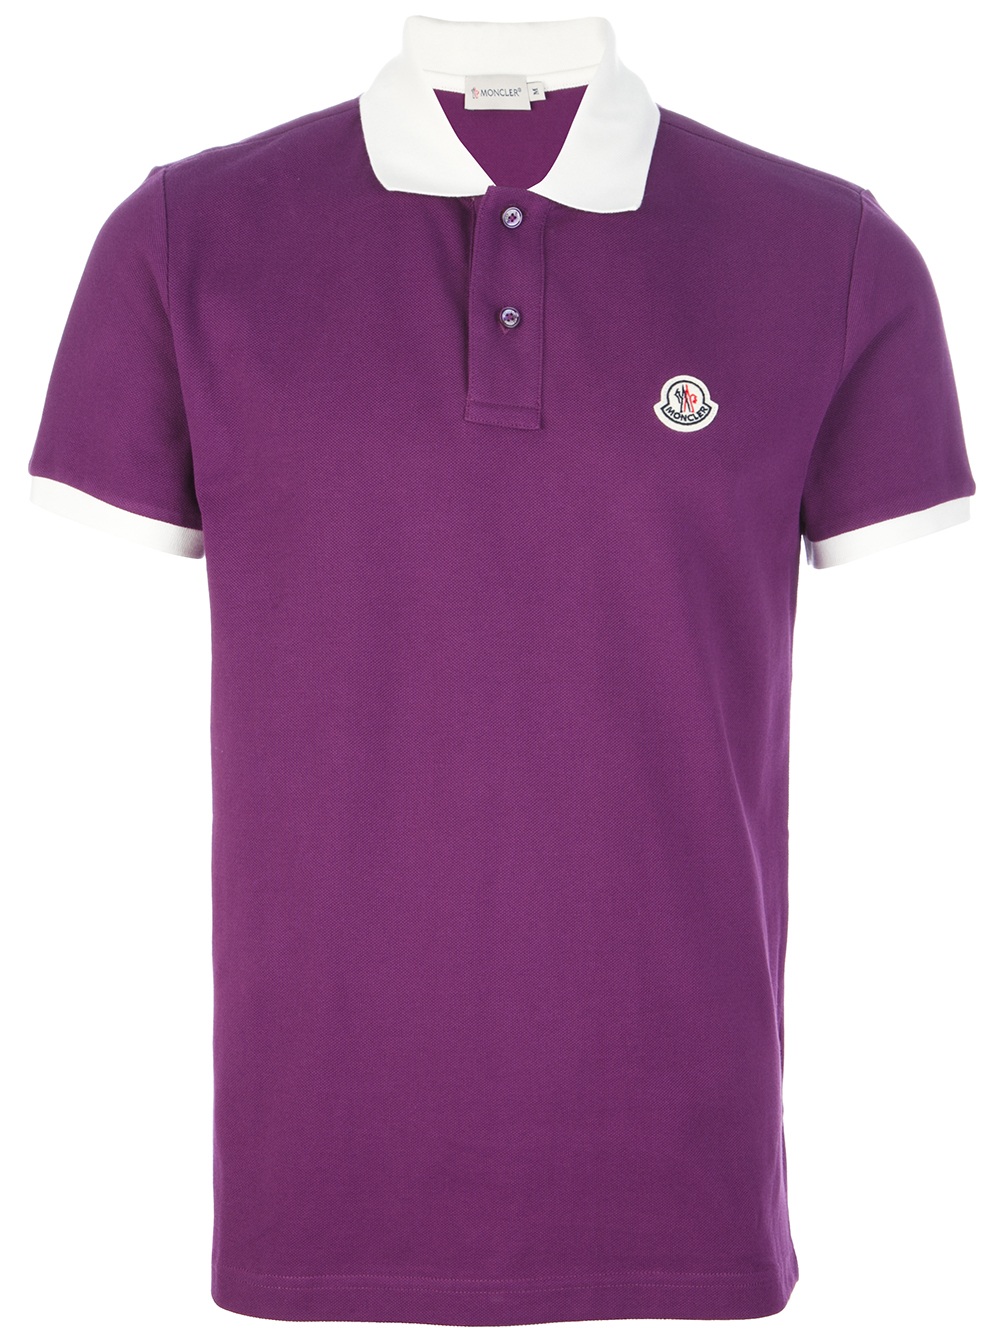 Moncler Contrast Collar Polo Shirt in Violet (Purple) for Men - Lyst